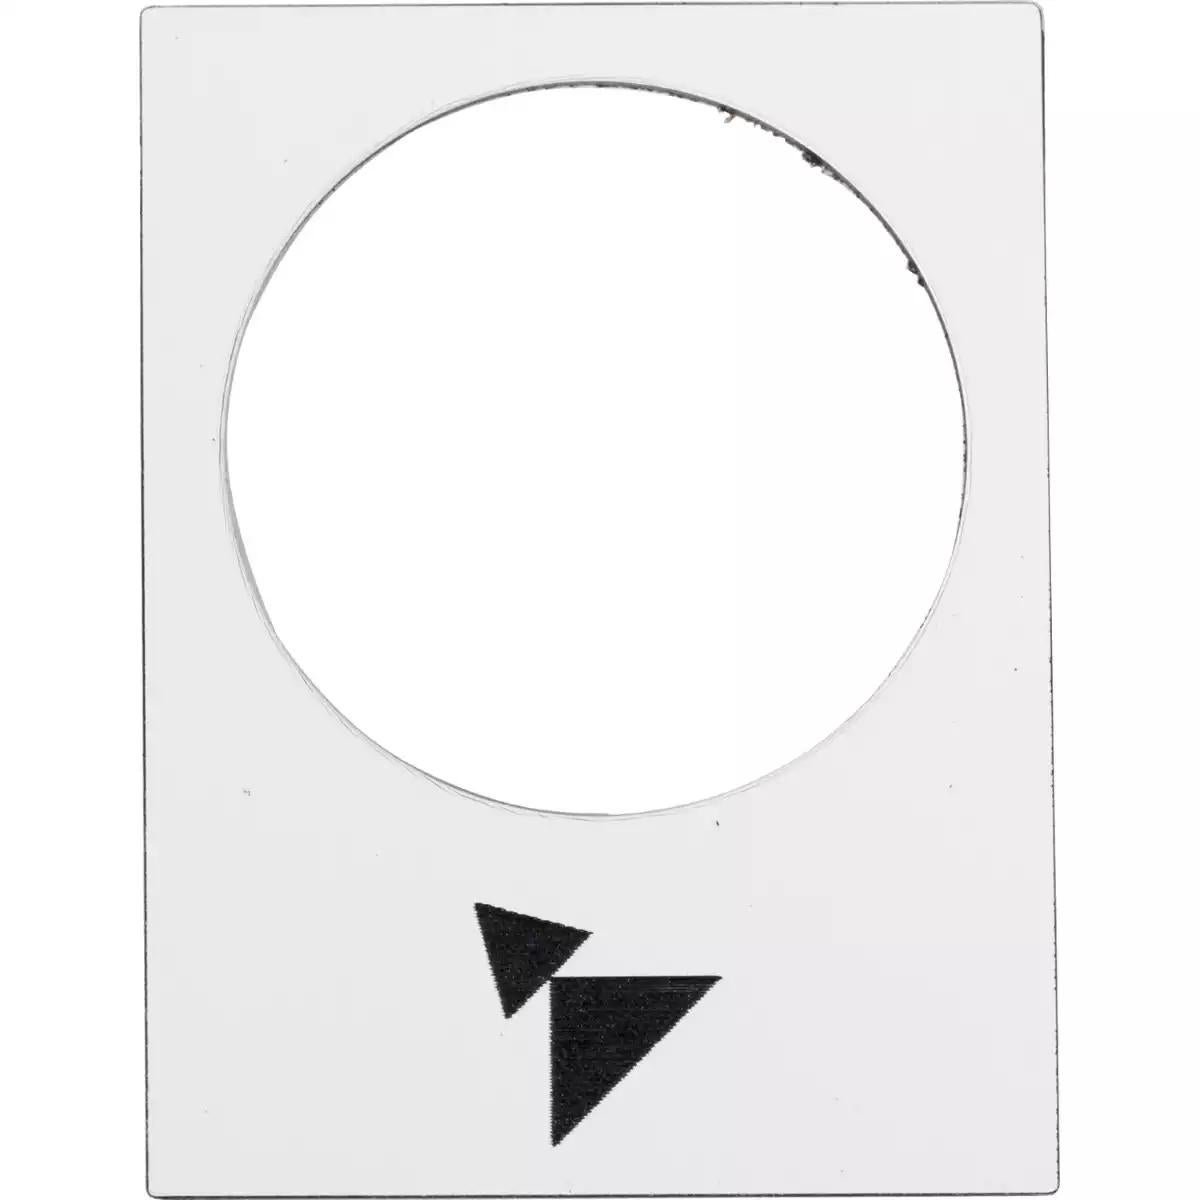 Harmony XAC, Marked Legend, Nameplate, 30 x 40mm, Plastic, White, 22mm Push Button, Black Marked Up Skew Double Arrowhead